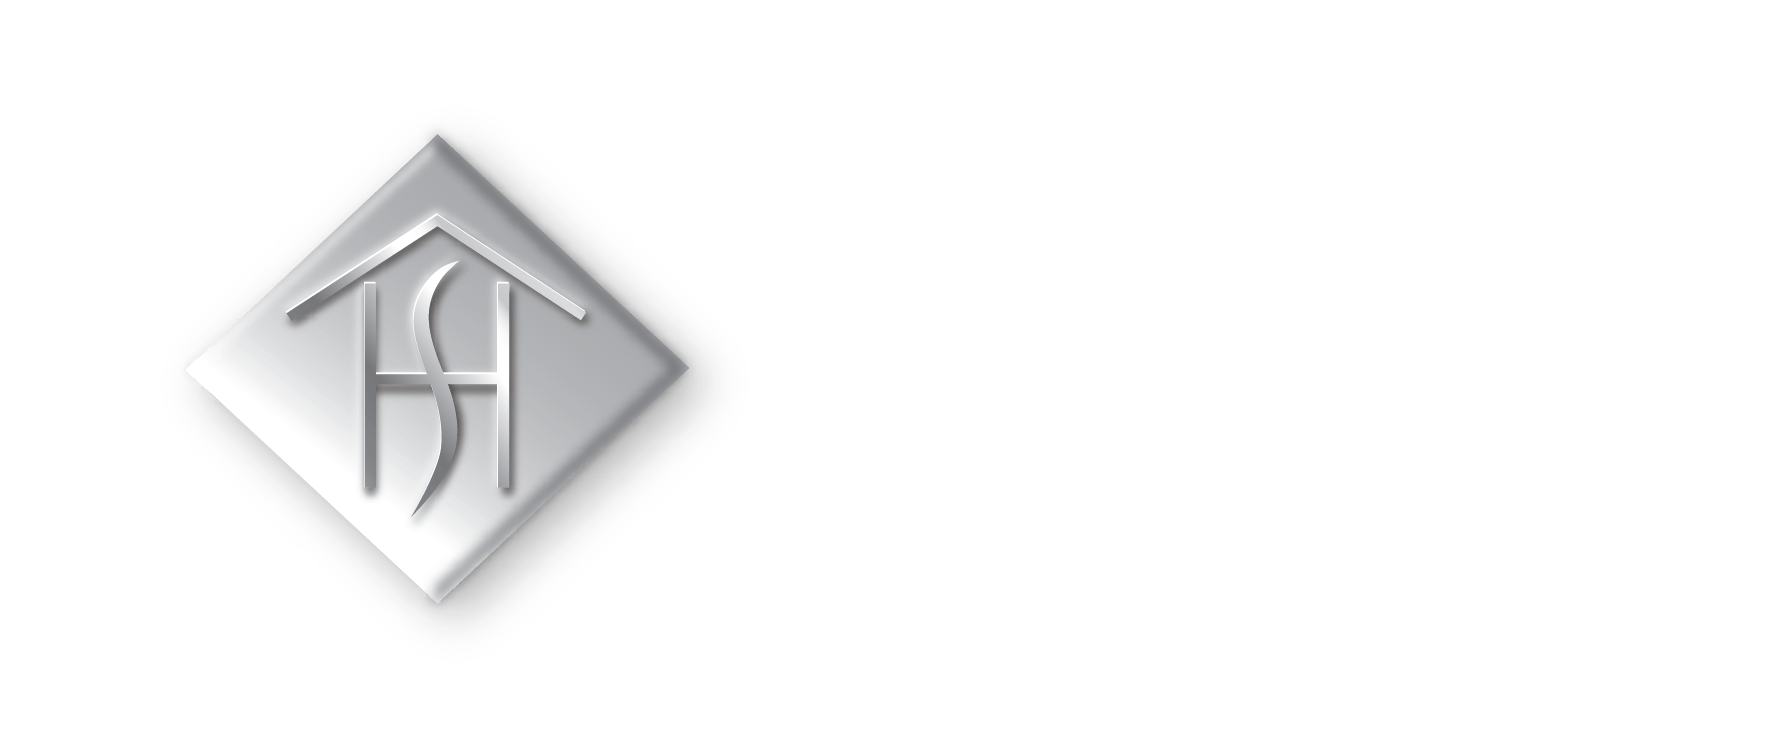 HomeSmart Logo - Join HomeSmart Evergreen Realty – Low Fee's, #1 Rated Broker Support ...